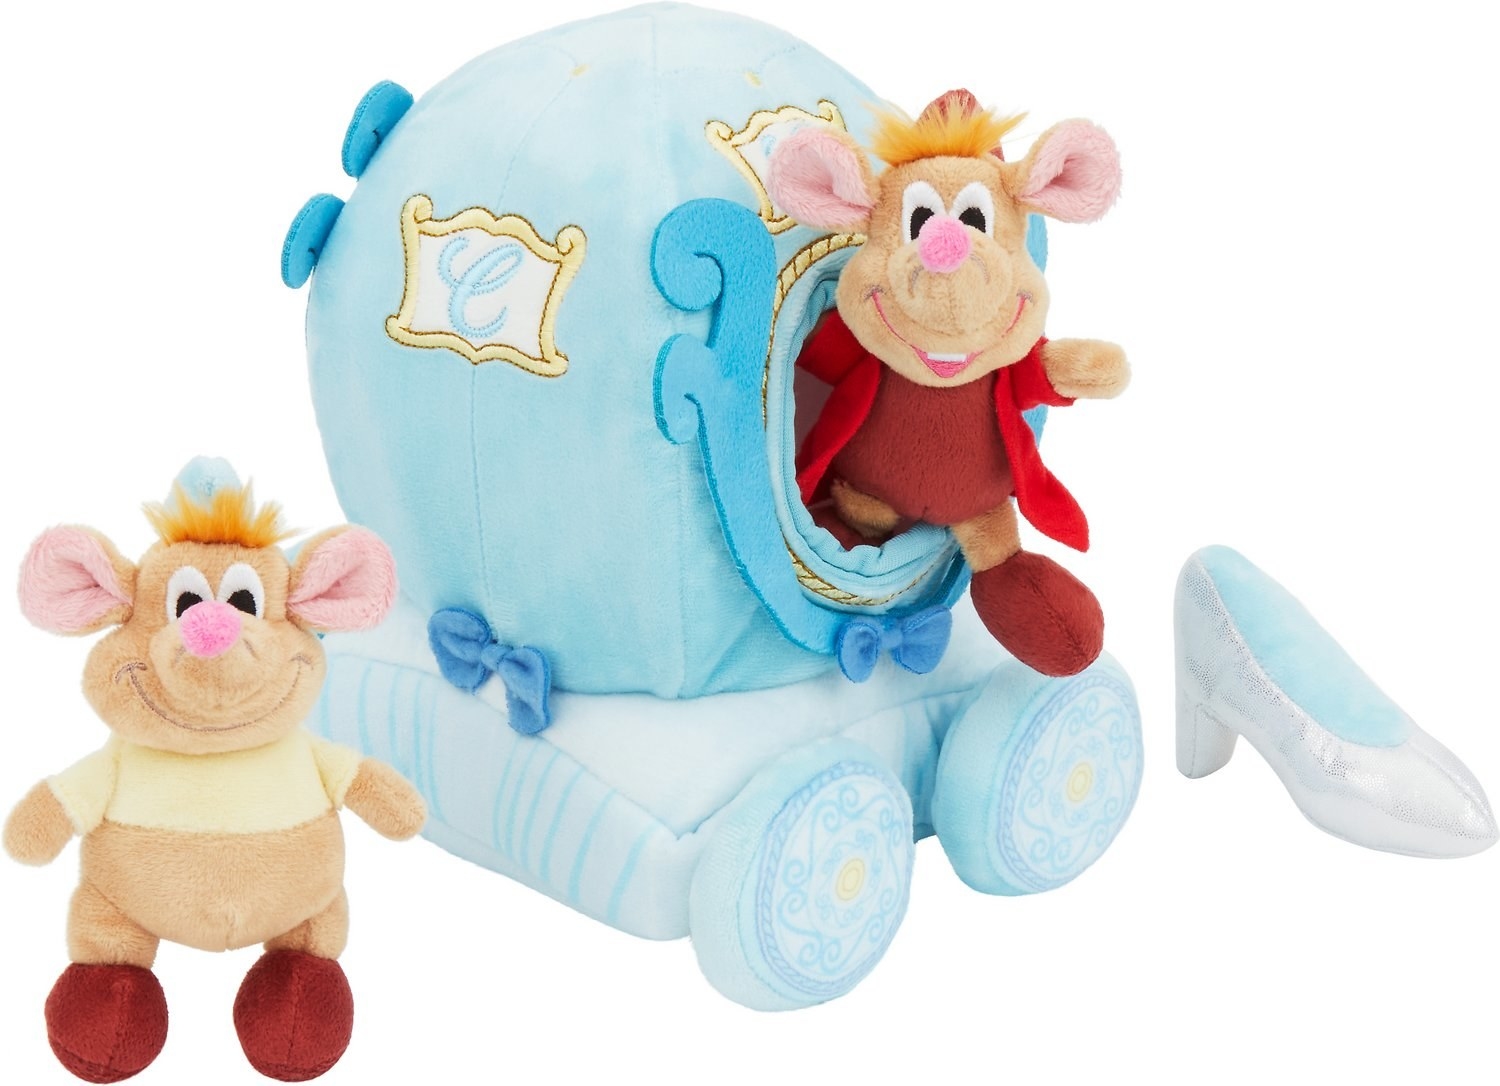 a hide and seek plush puzzle toy of cinderella&#x27;s carriage, gus gus, jaques, and a glass slipper